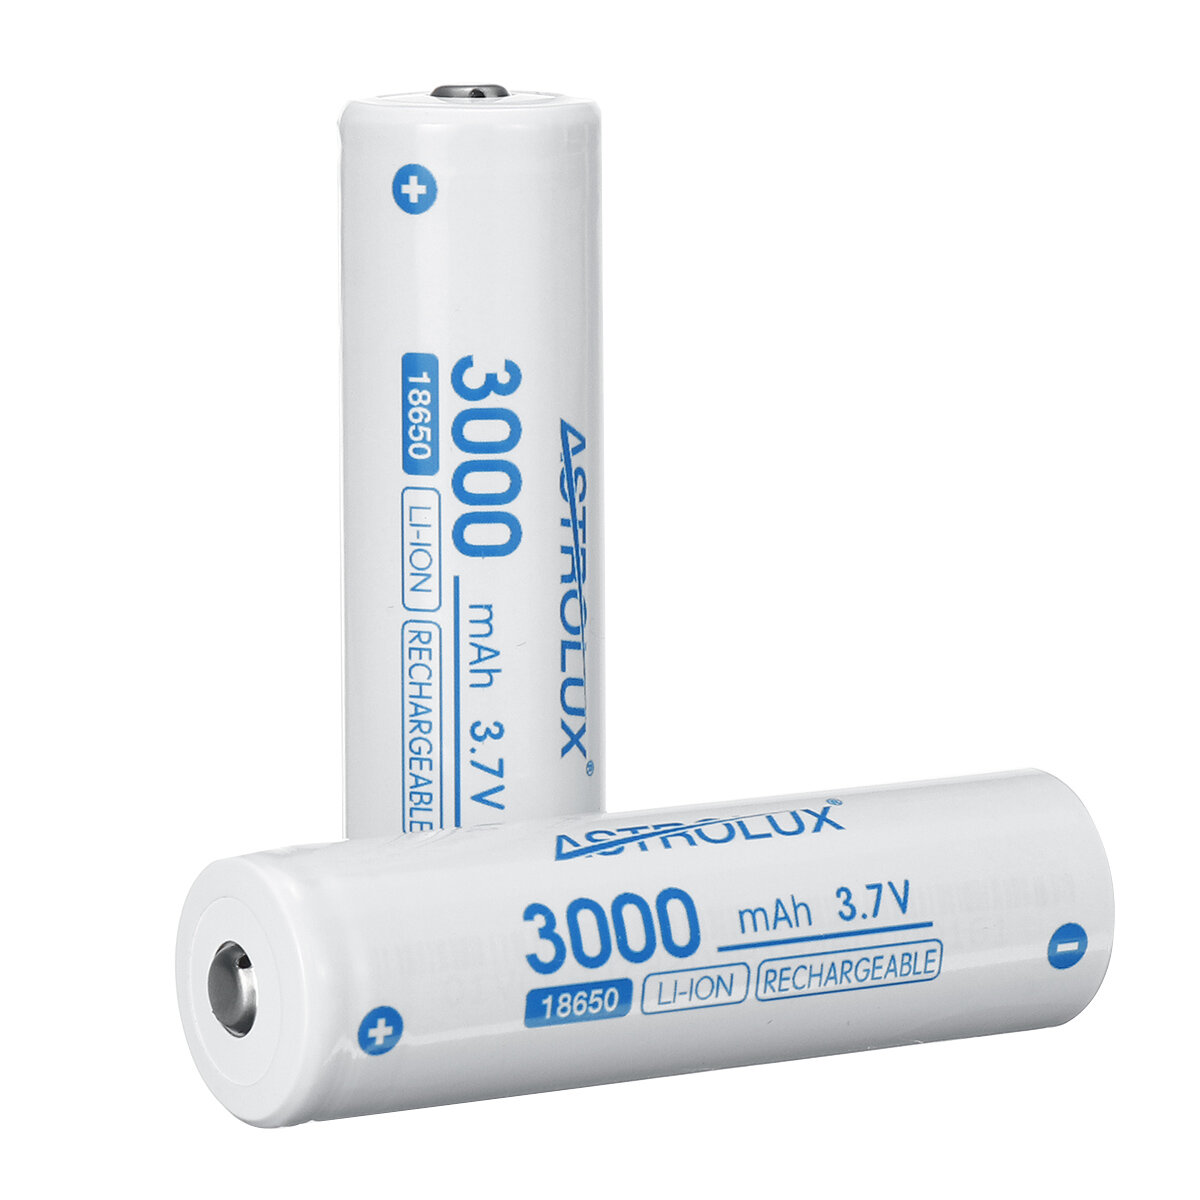 best price,2pcs,astrolux,c1830,3000mah,3c,3.7v,18650,battery,9.6a,coupon,price,discount